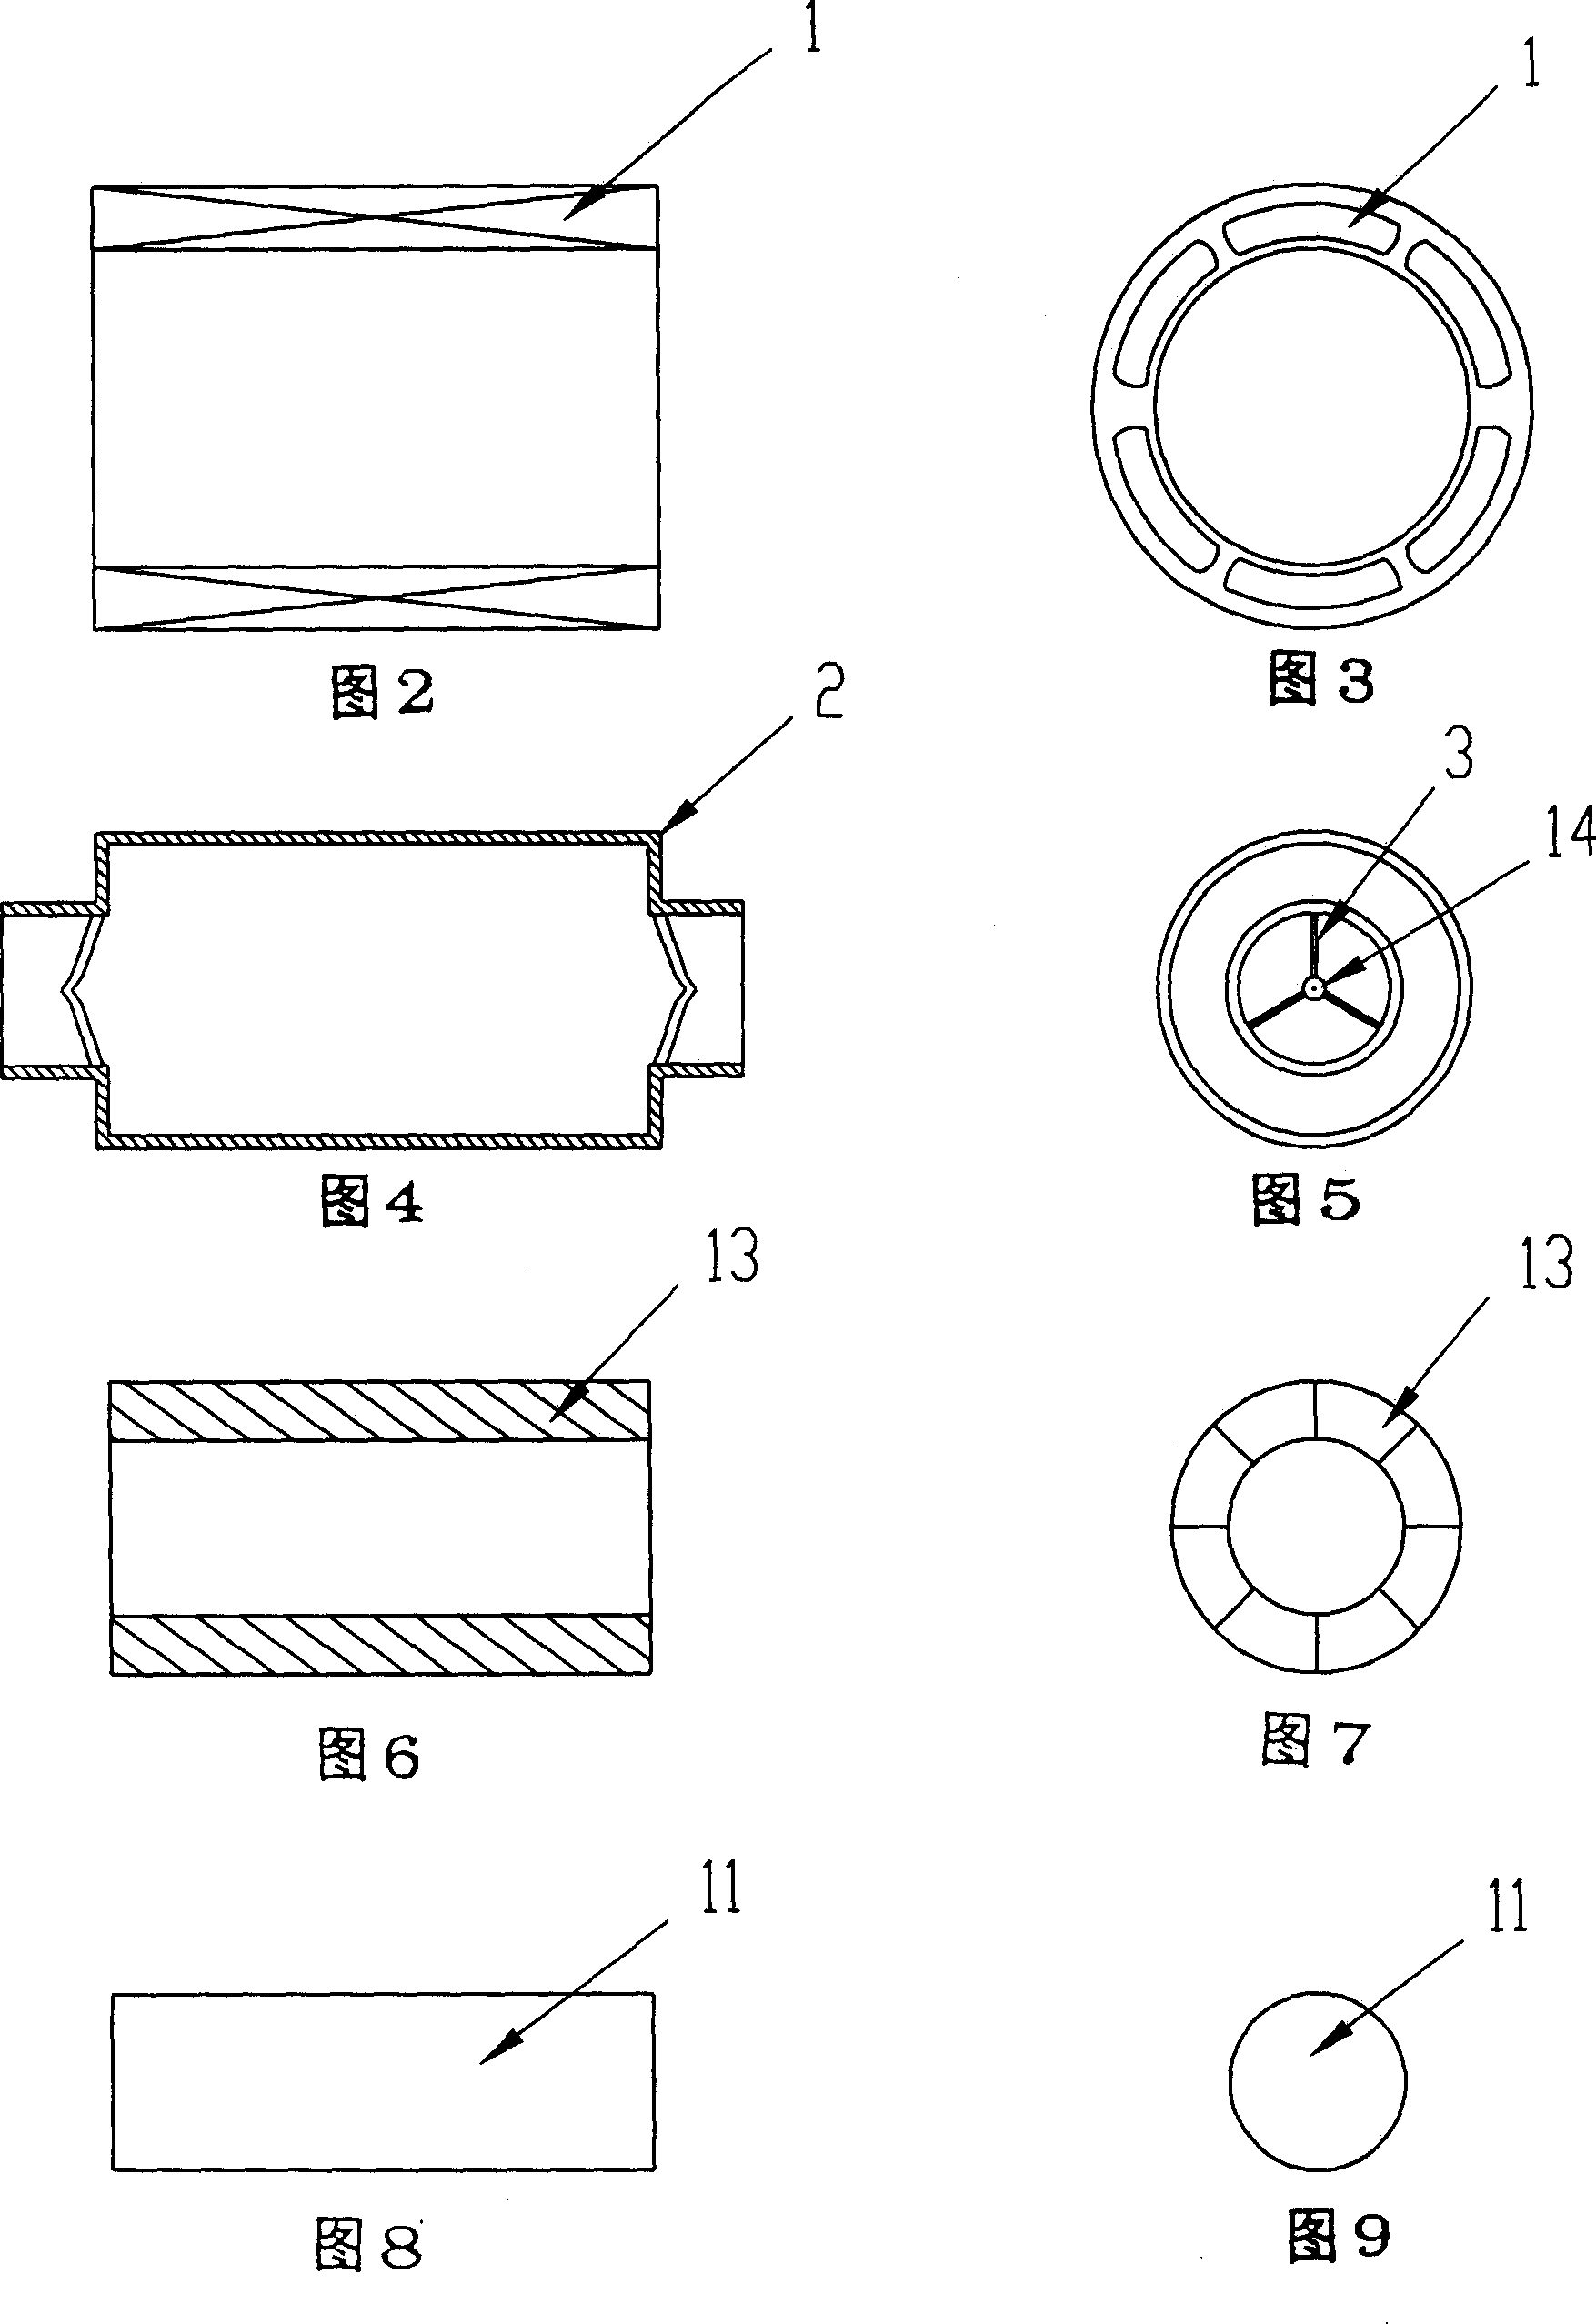 Magnetic-driven axial-flow auxiliary pump for heart